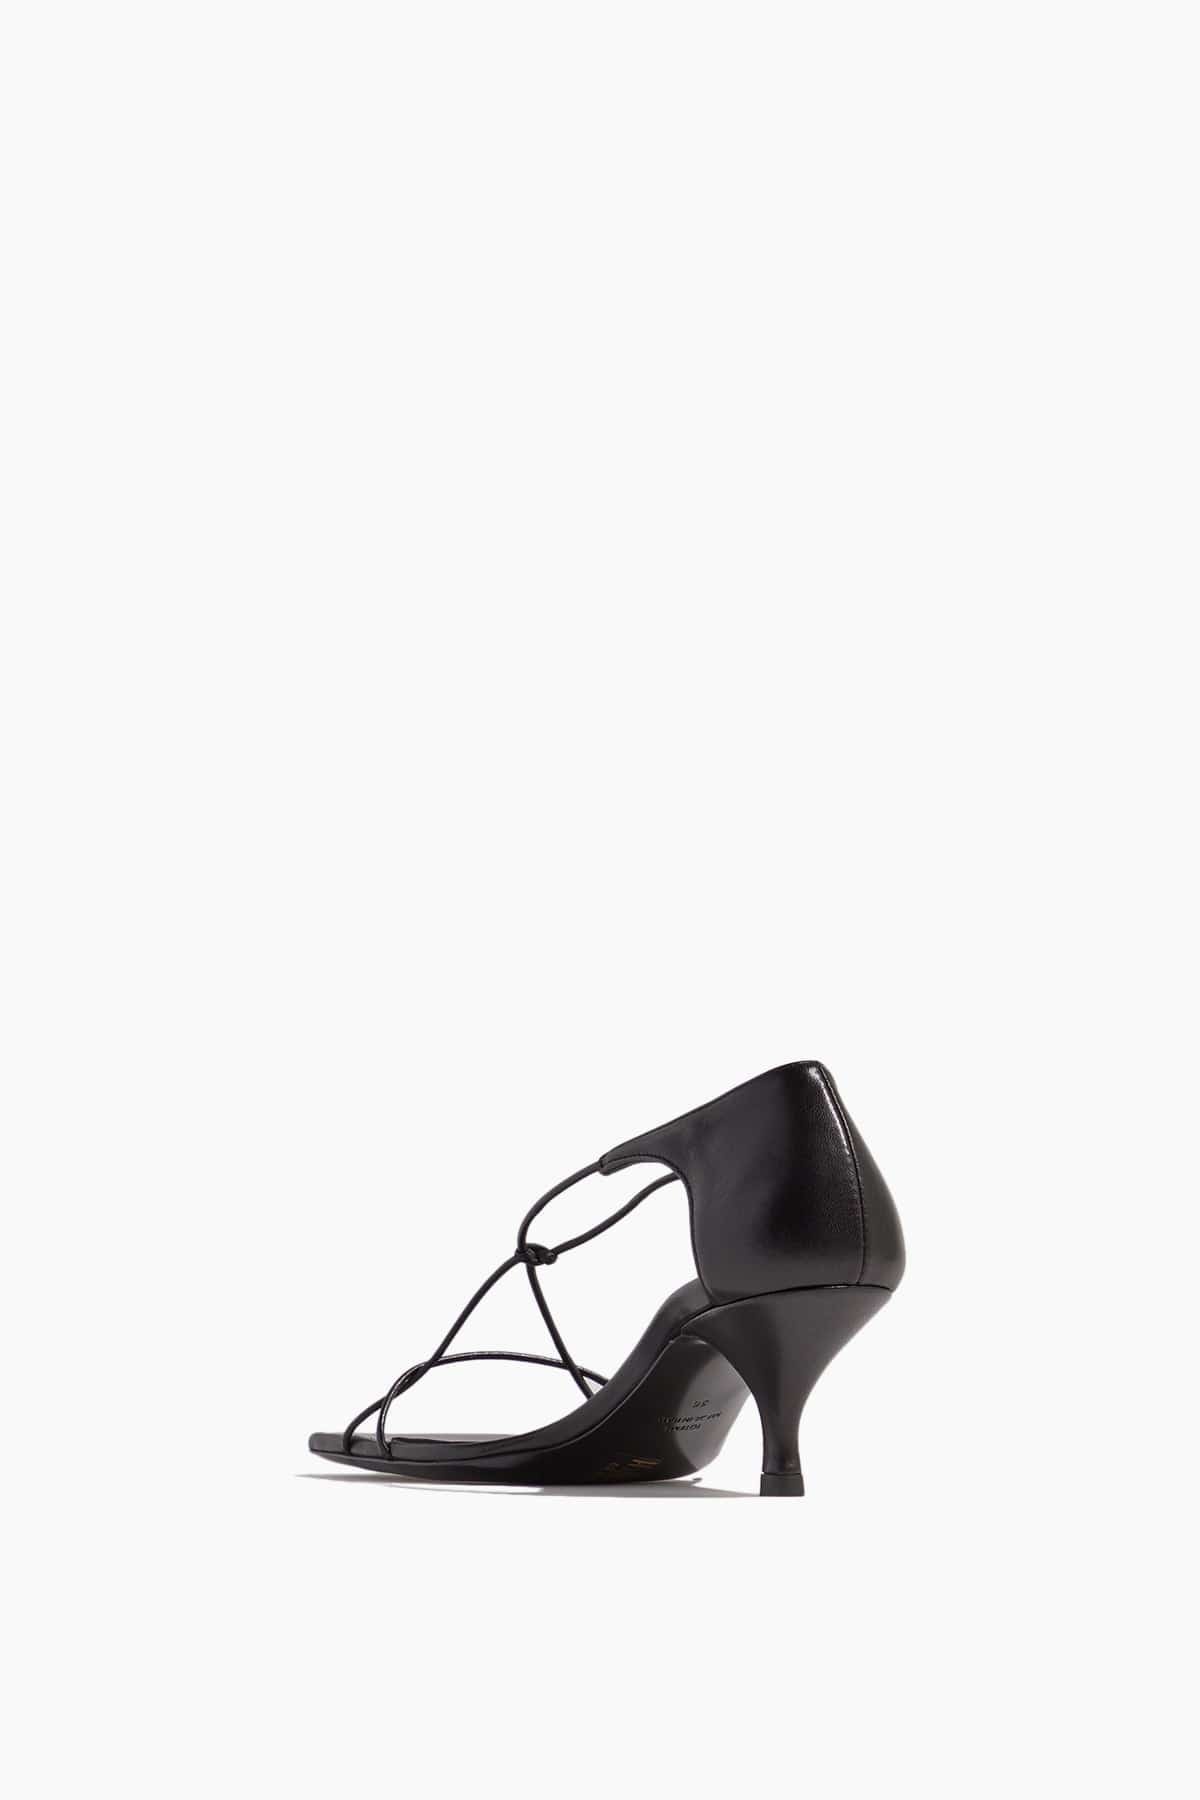 The Leather Knot Sandal in Black - 3